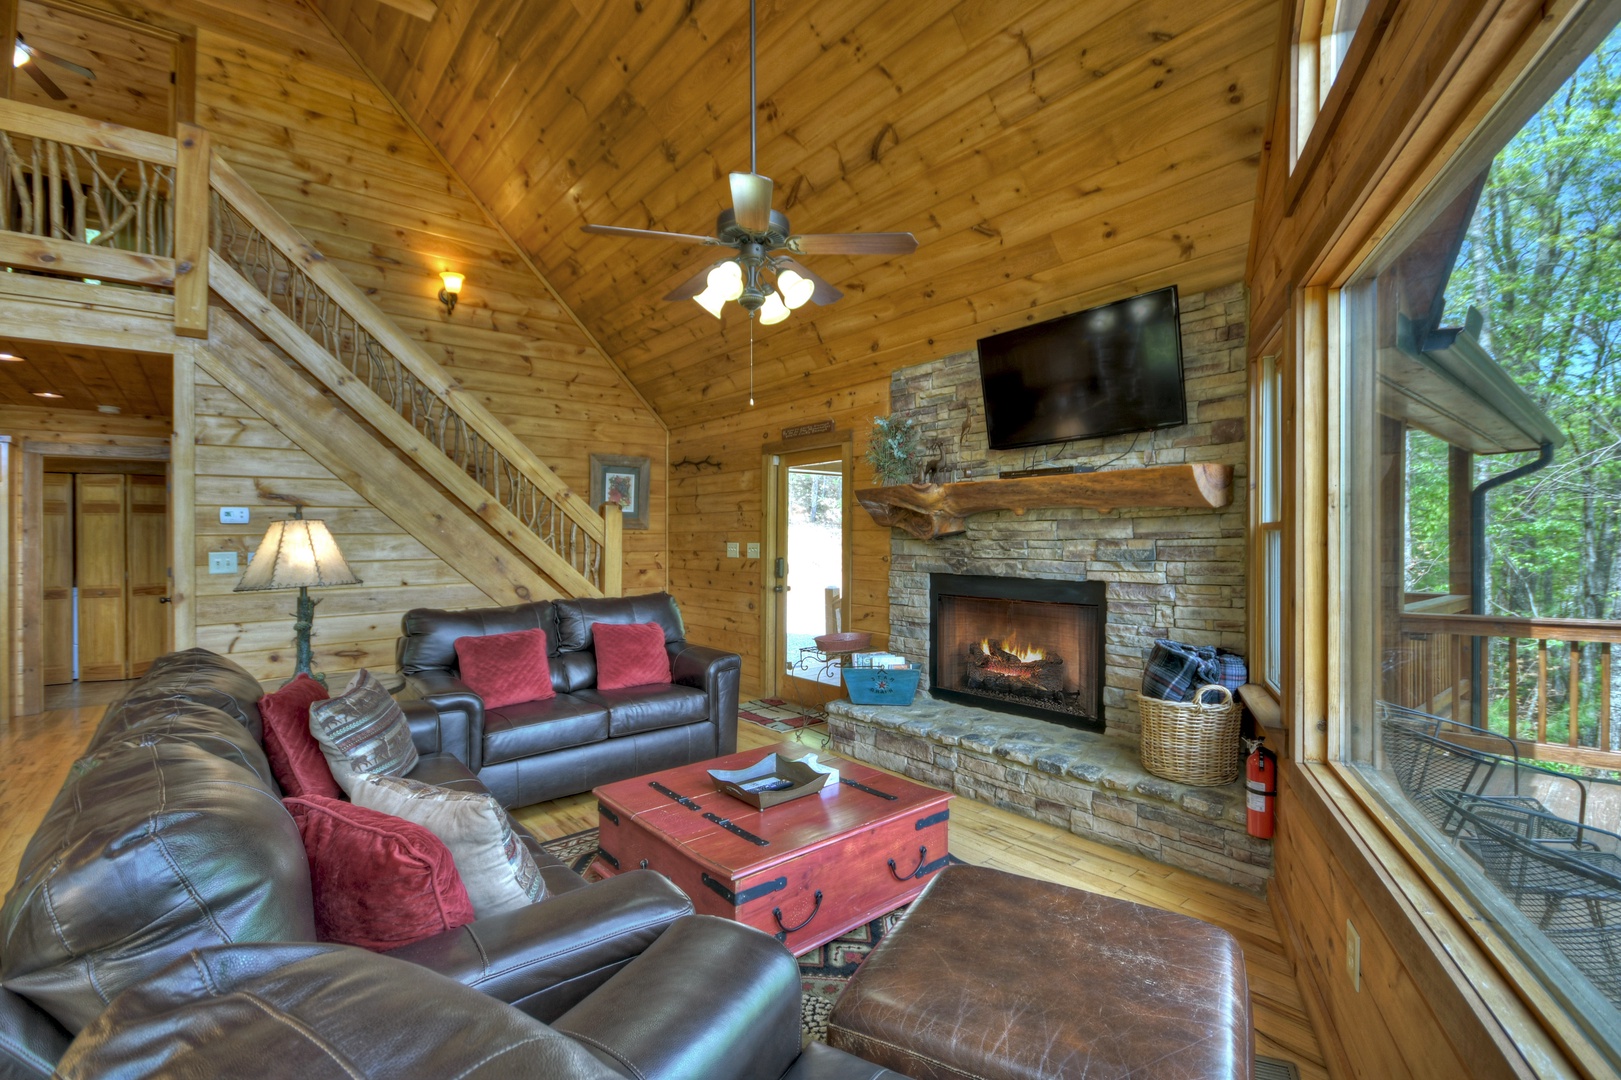 Aska Lodge- Spacious living room with rustic decor and staircase leading upstairs